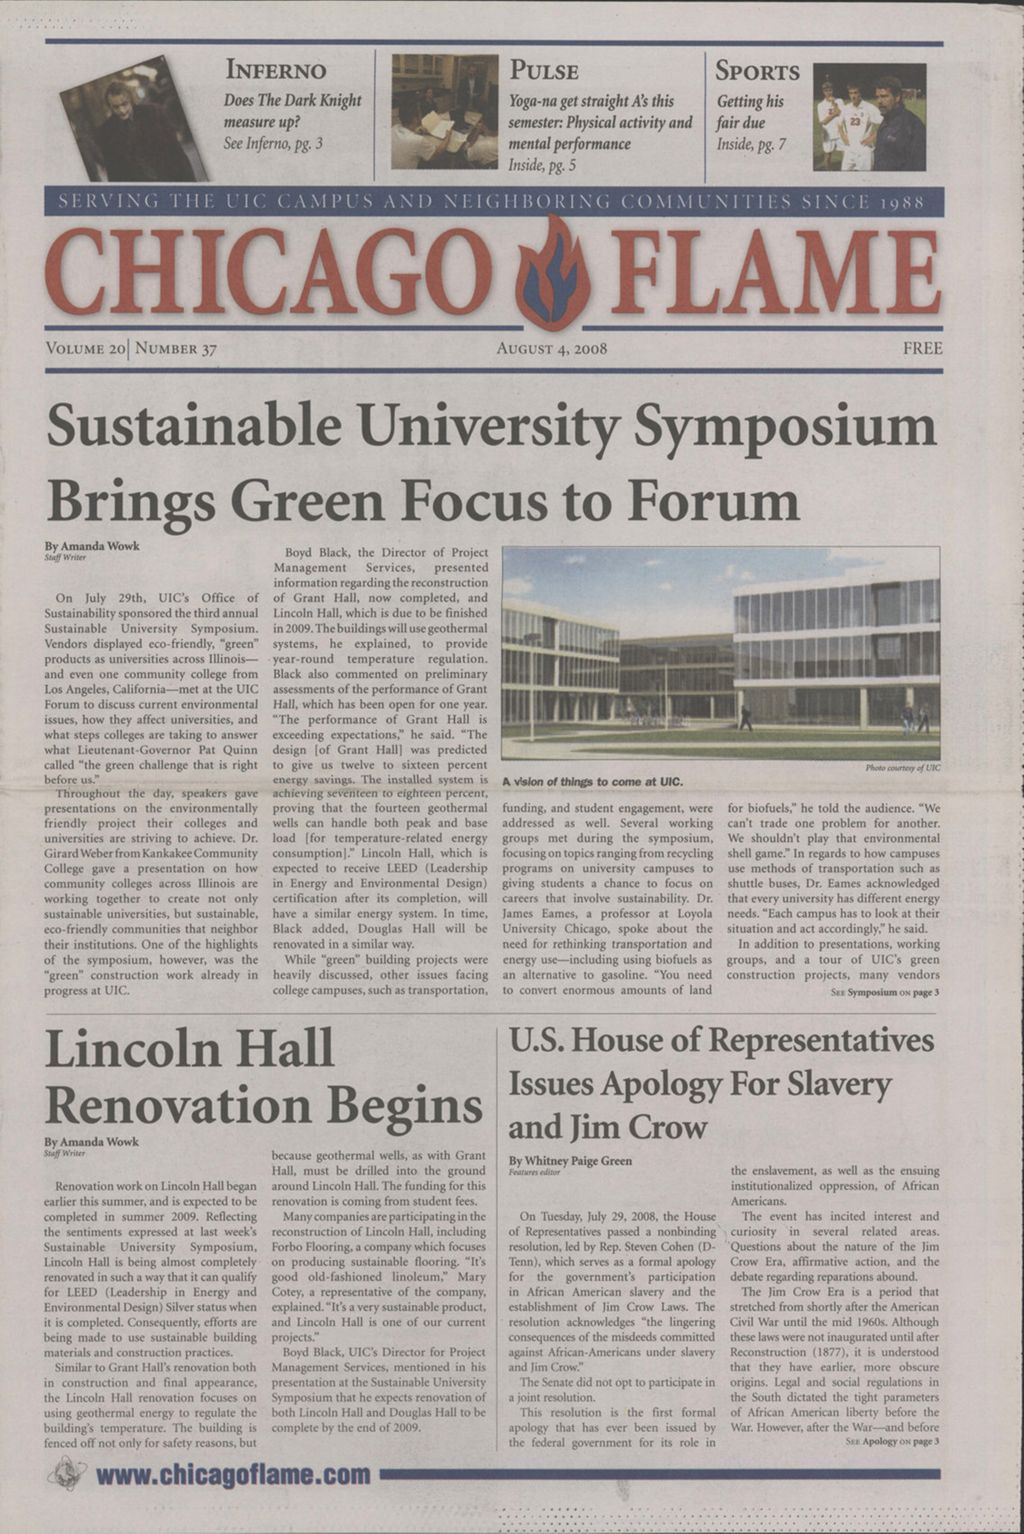 Miniature of Chicago Flame (August 4, 2008)